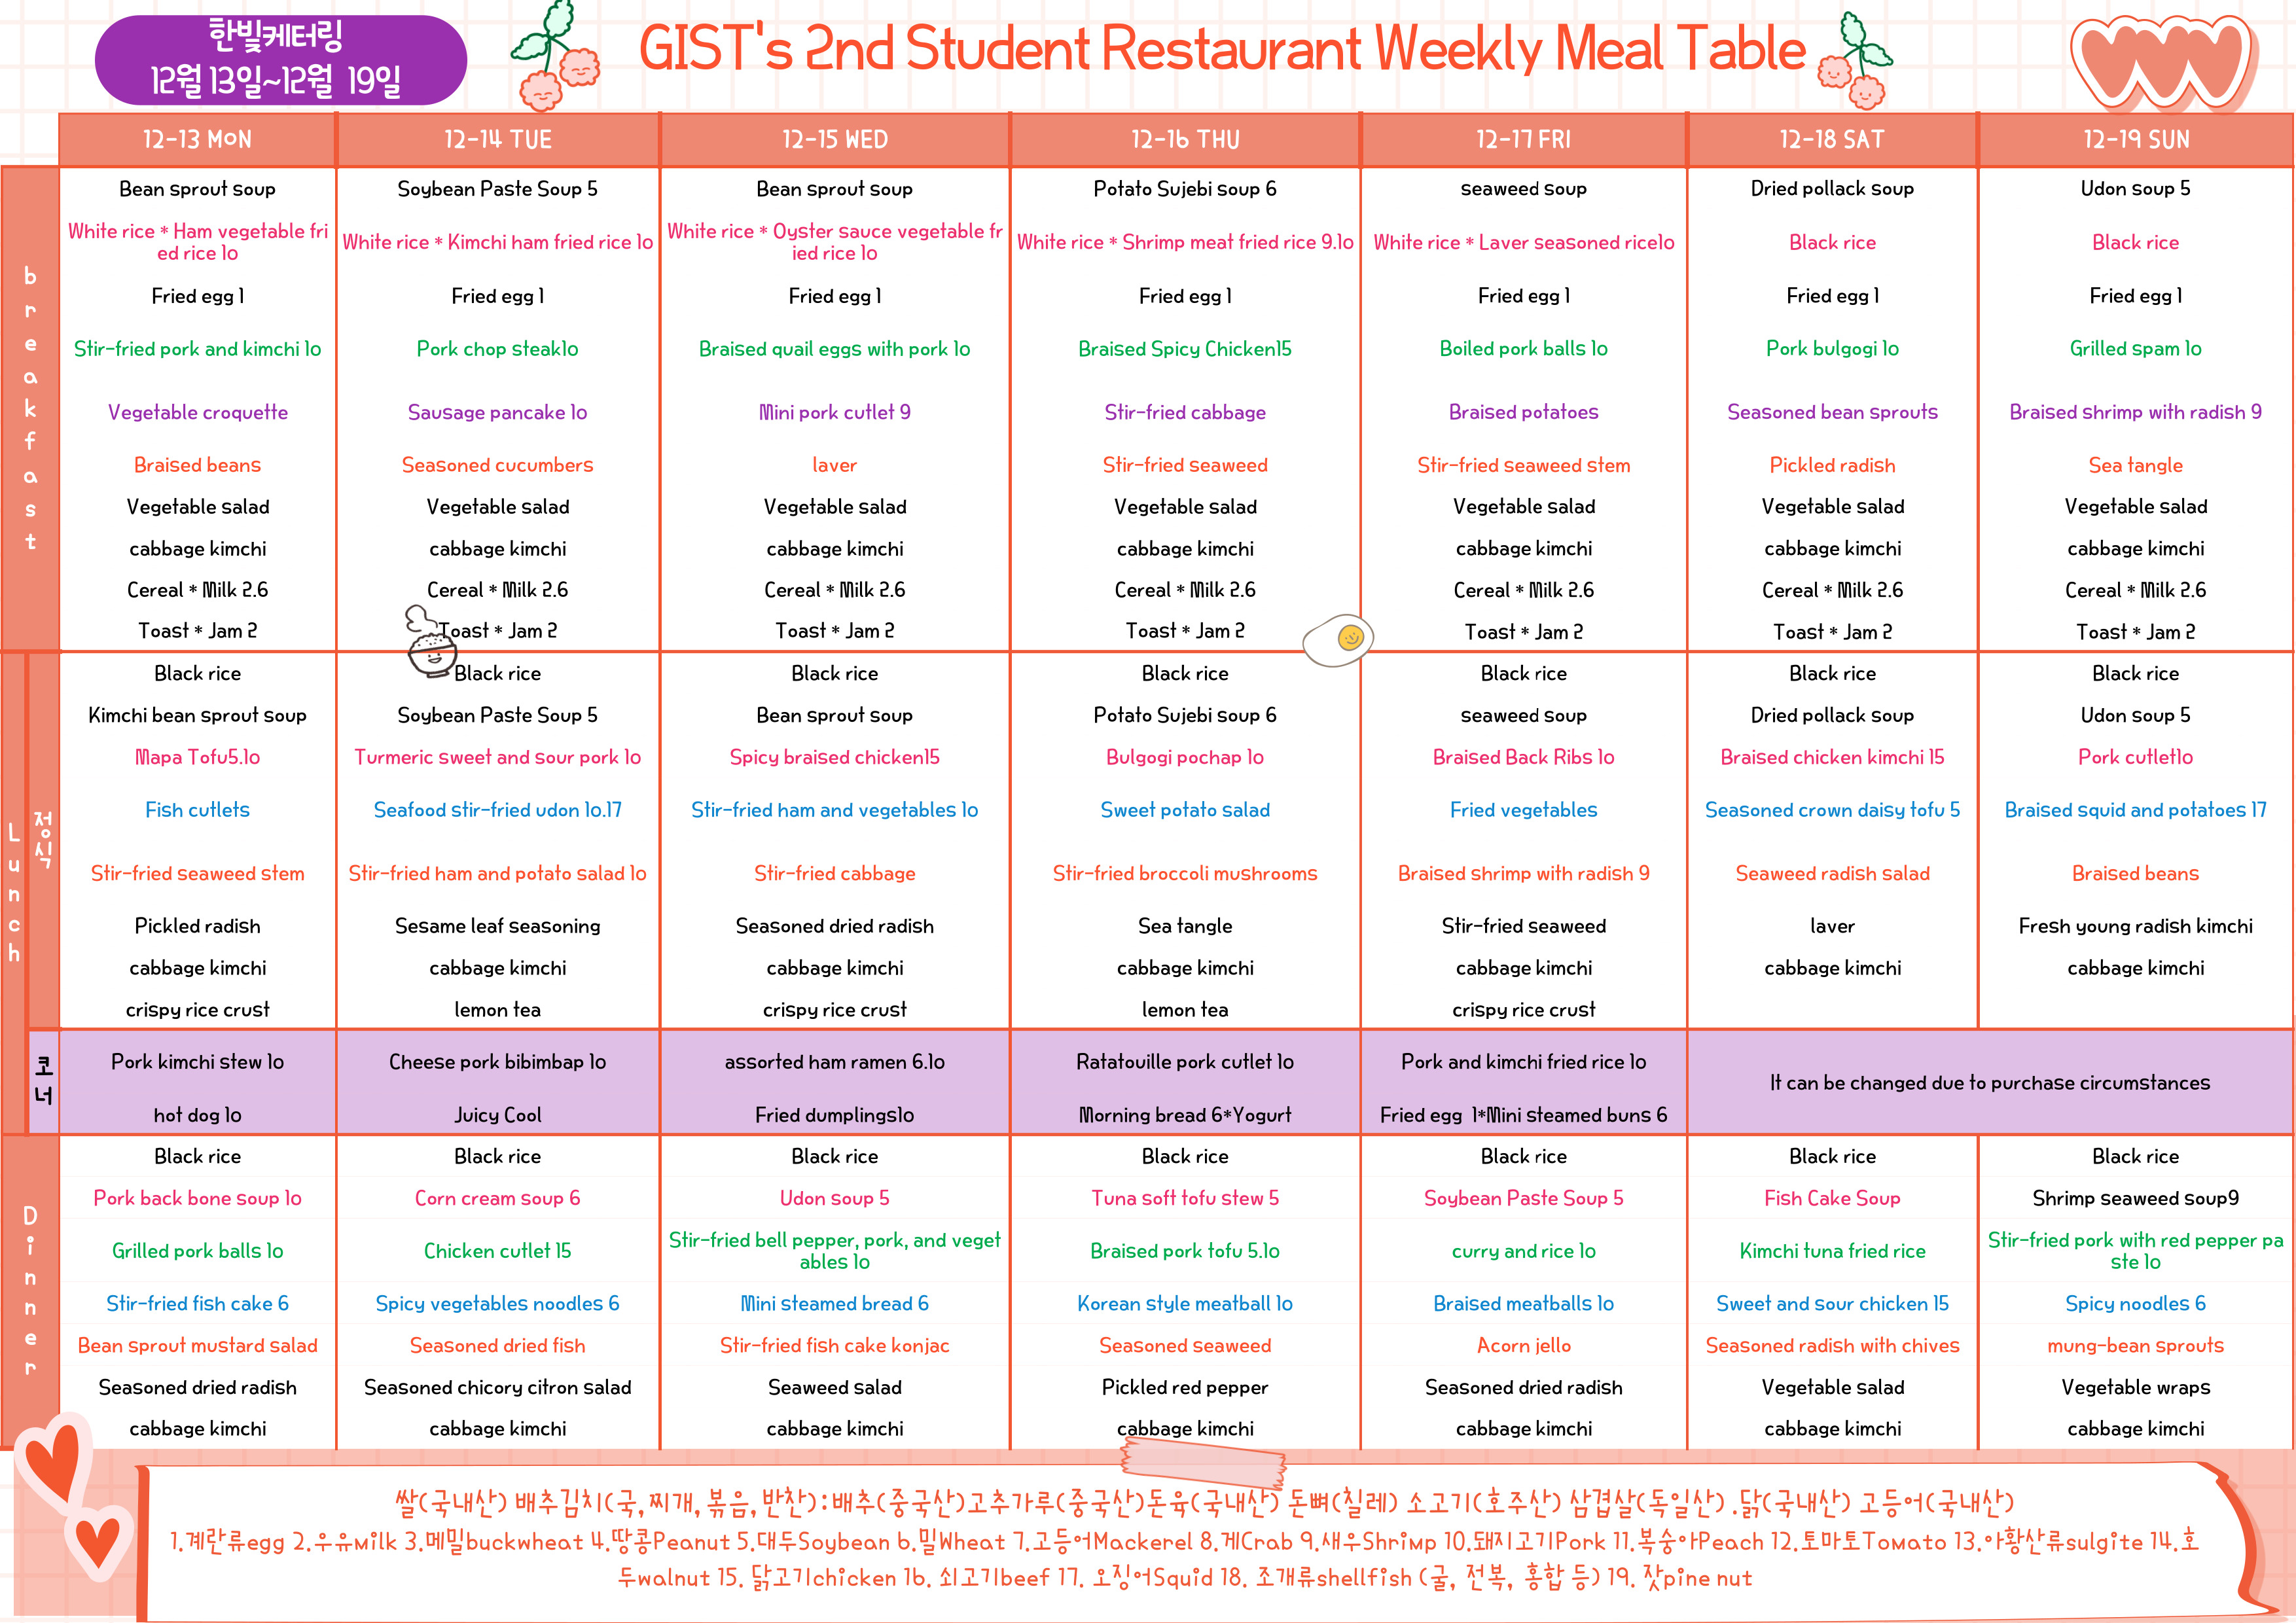 The 2nd Student Restaurant Weekly Meal Table (2021.12.13 ~2021.12.19) 이미지